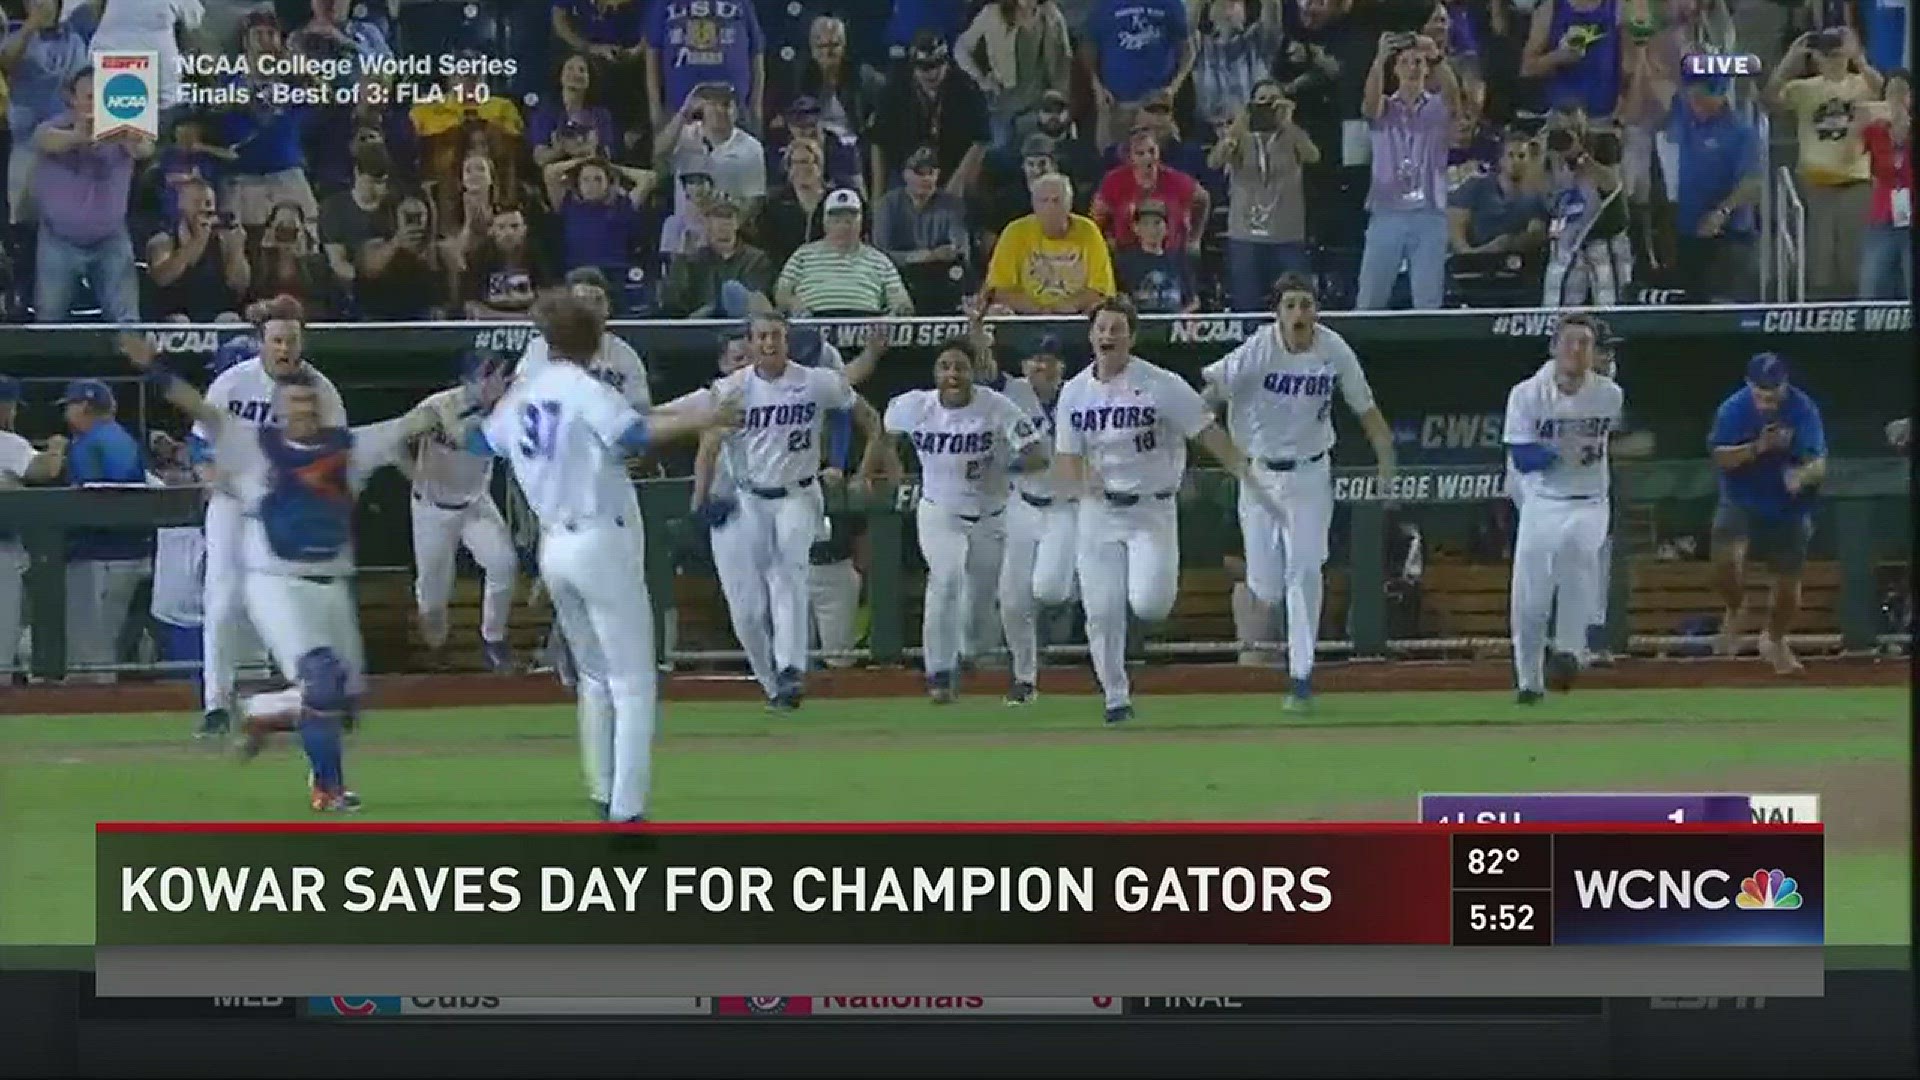 Charlotte Christian grad recorded the last out of the College World Series